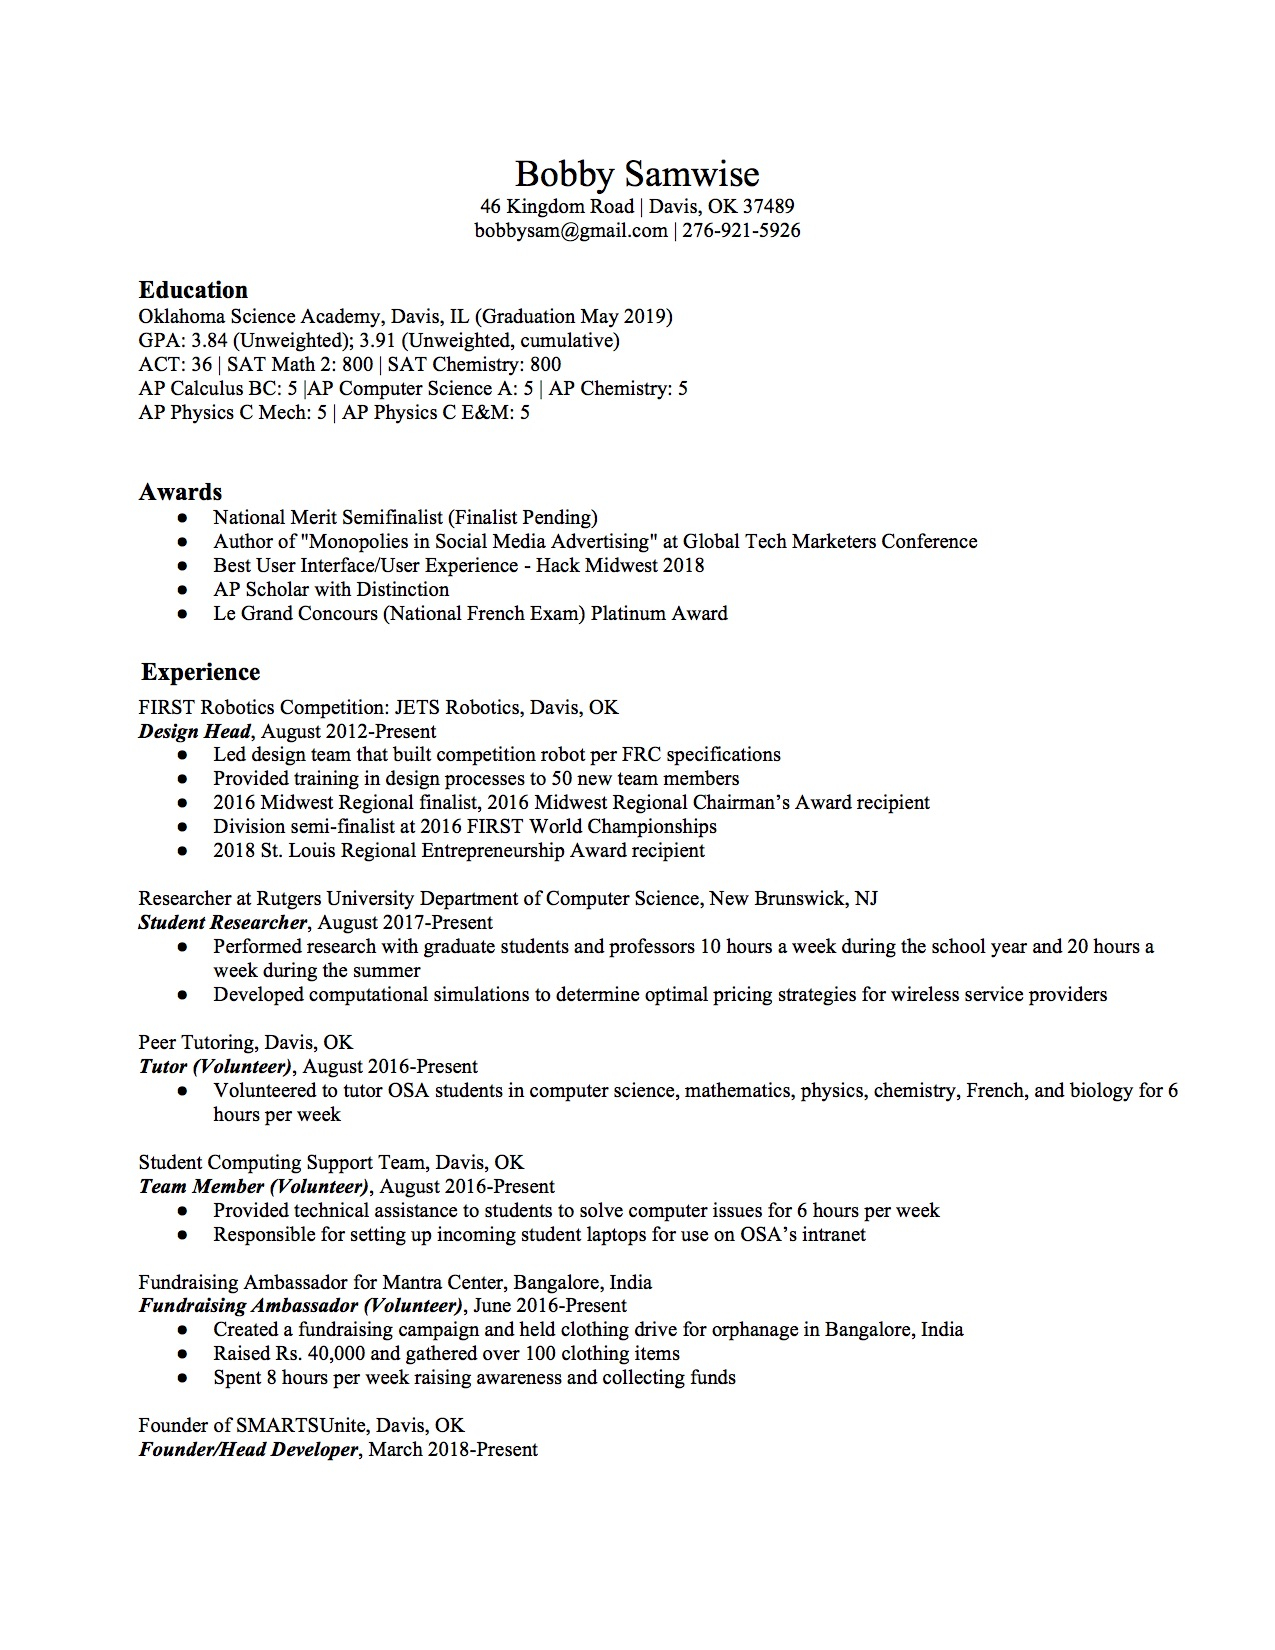 Student Resume Template High School Resume How To Write The Best One Templates Included